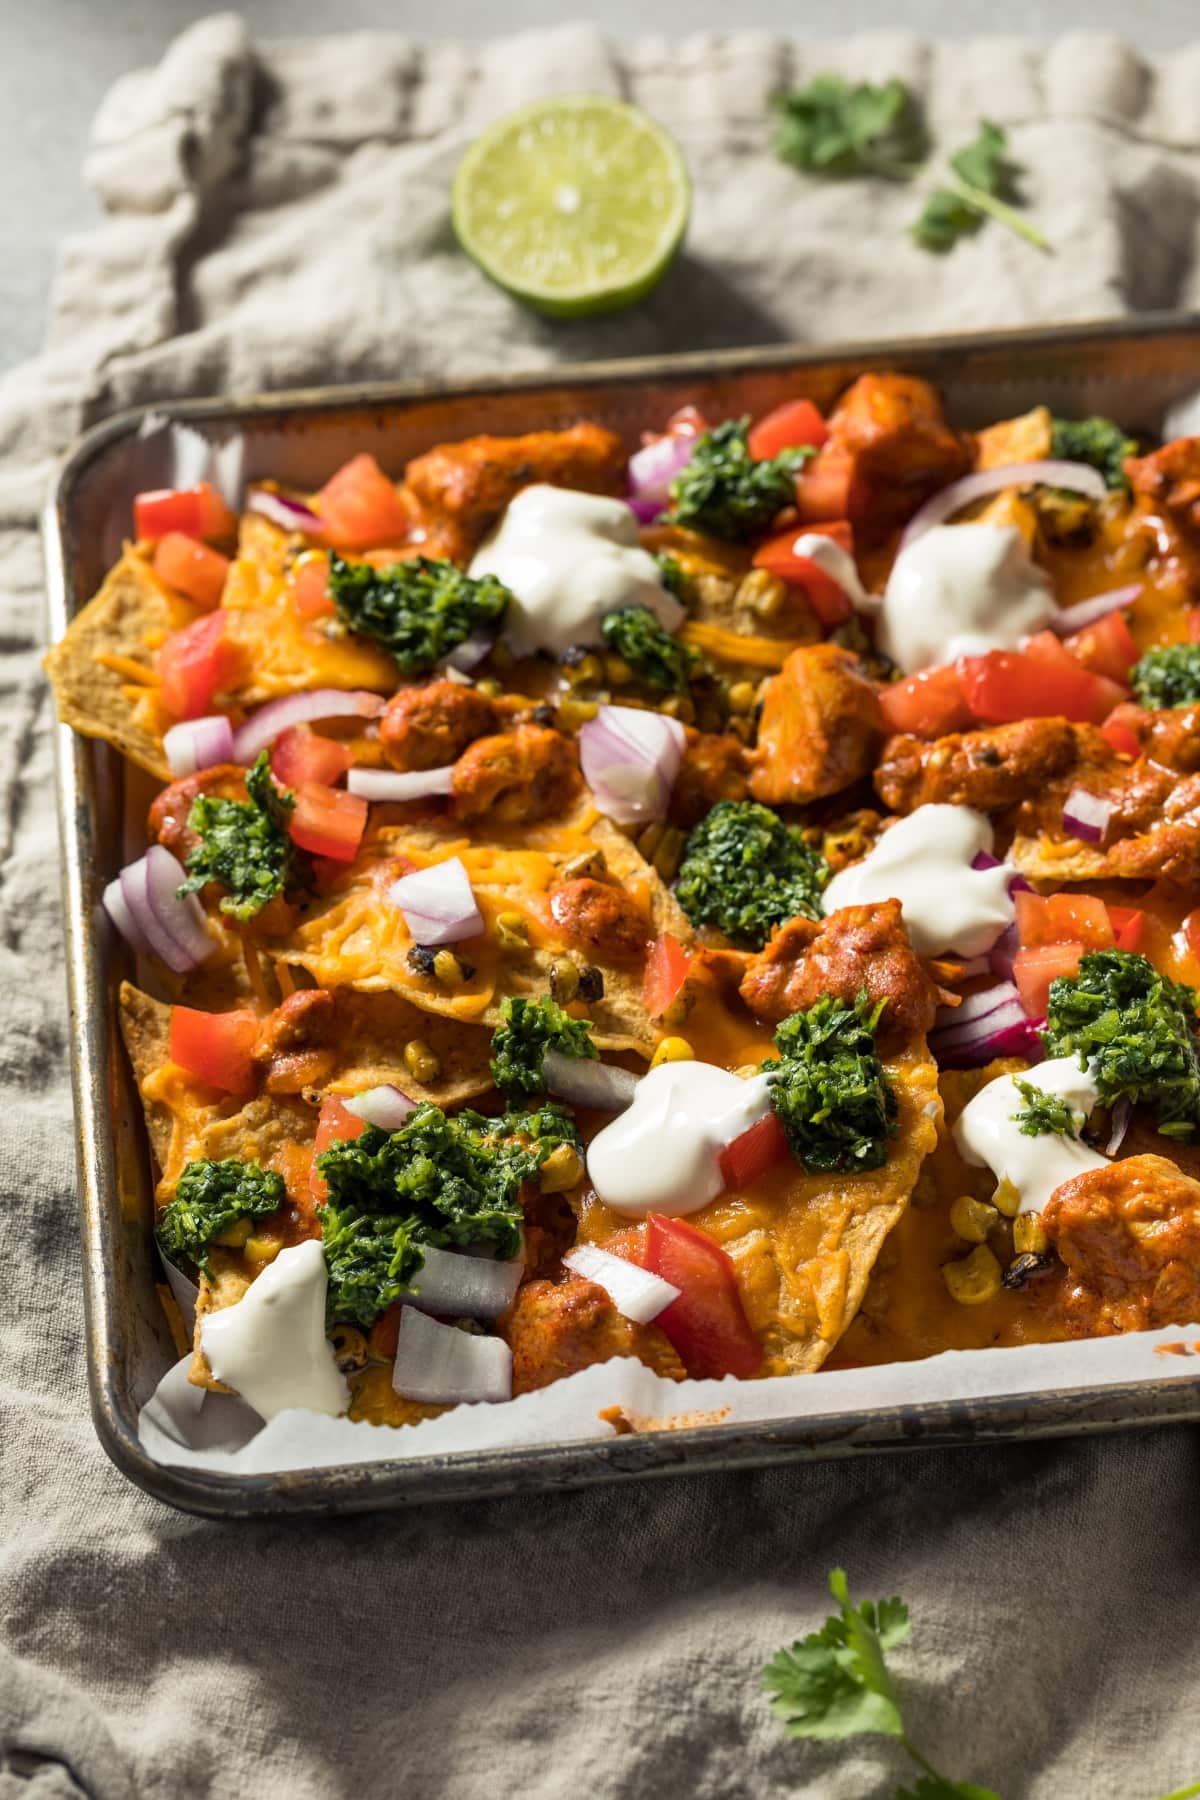 https://insanelygoodrecipes.com/wp-content/uploads/2023/08/Homemade-Chicken-Nachos-with-Broccoli-Onions-and-Tomatoes.jpg